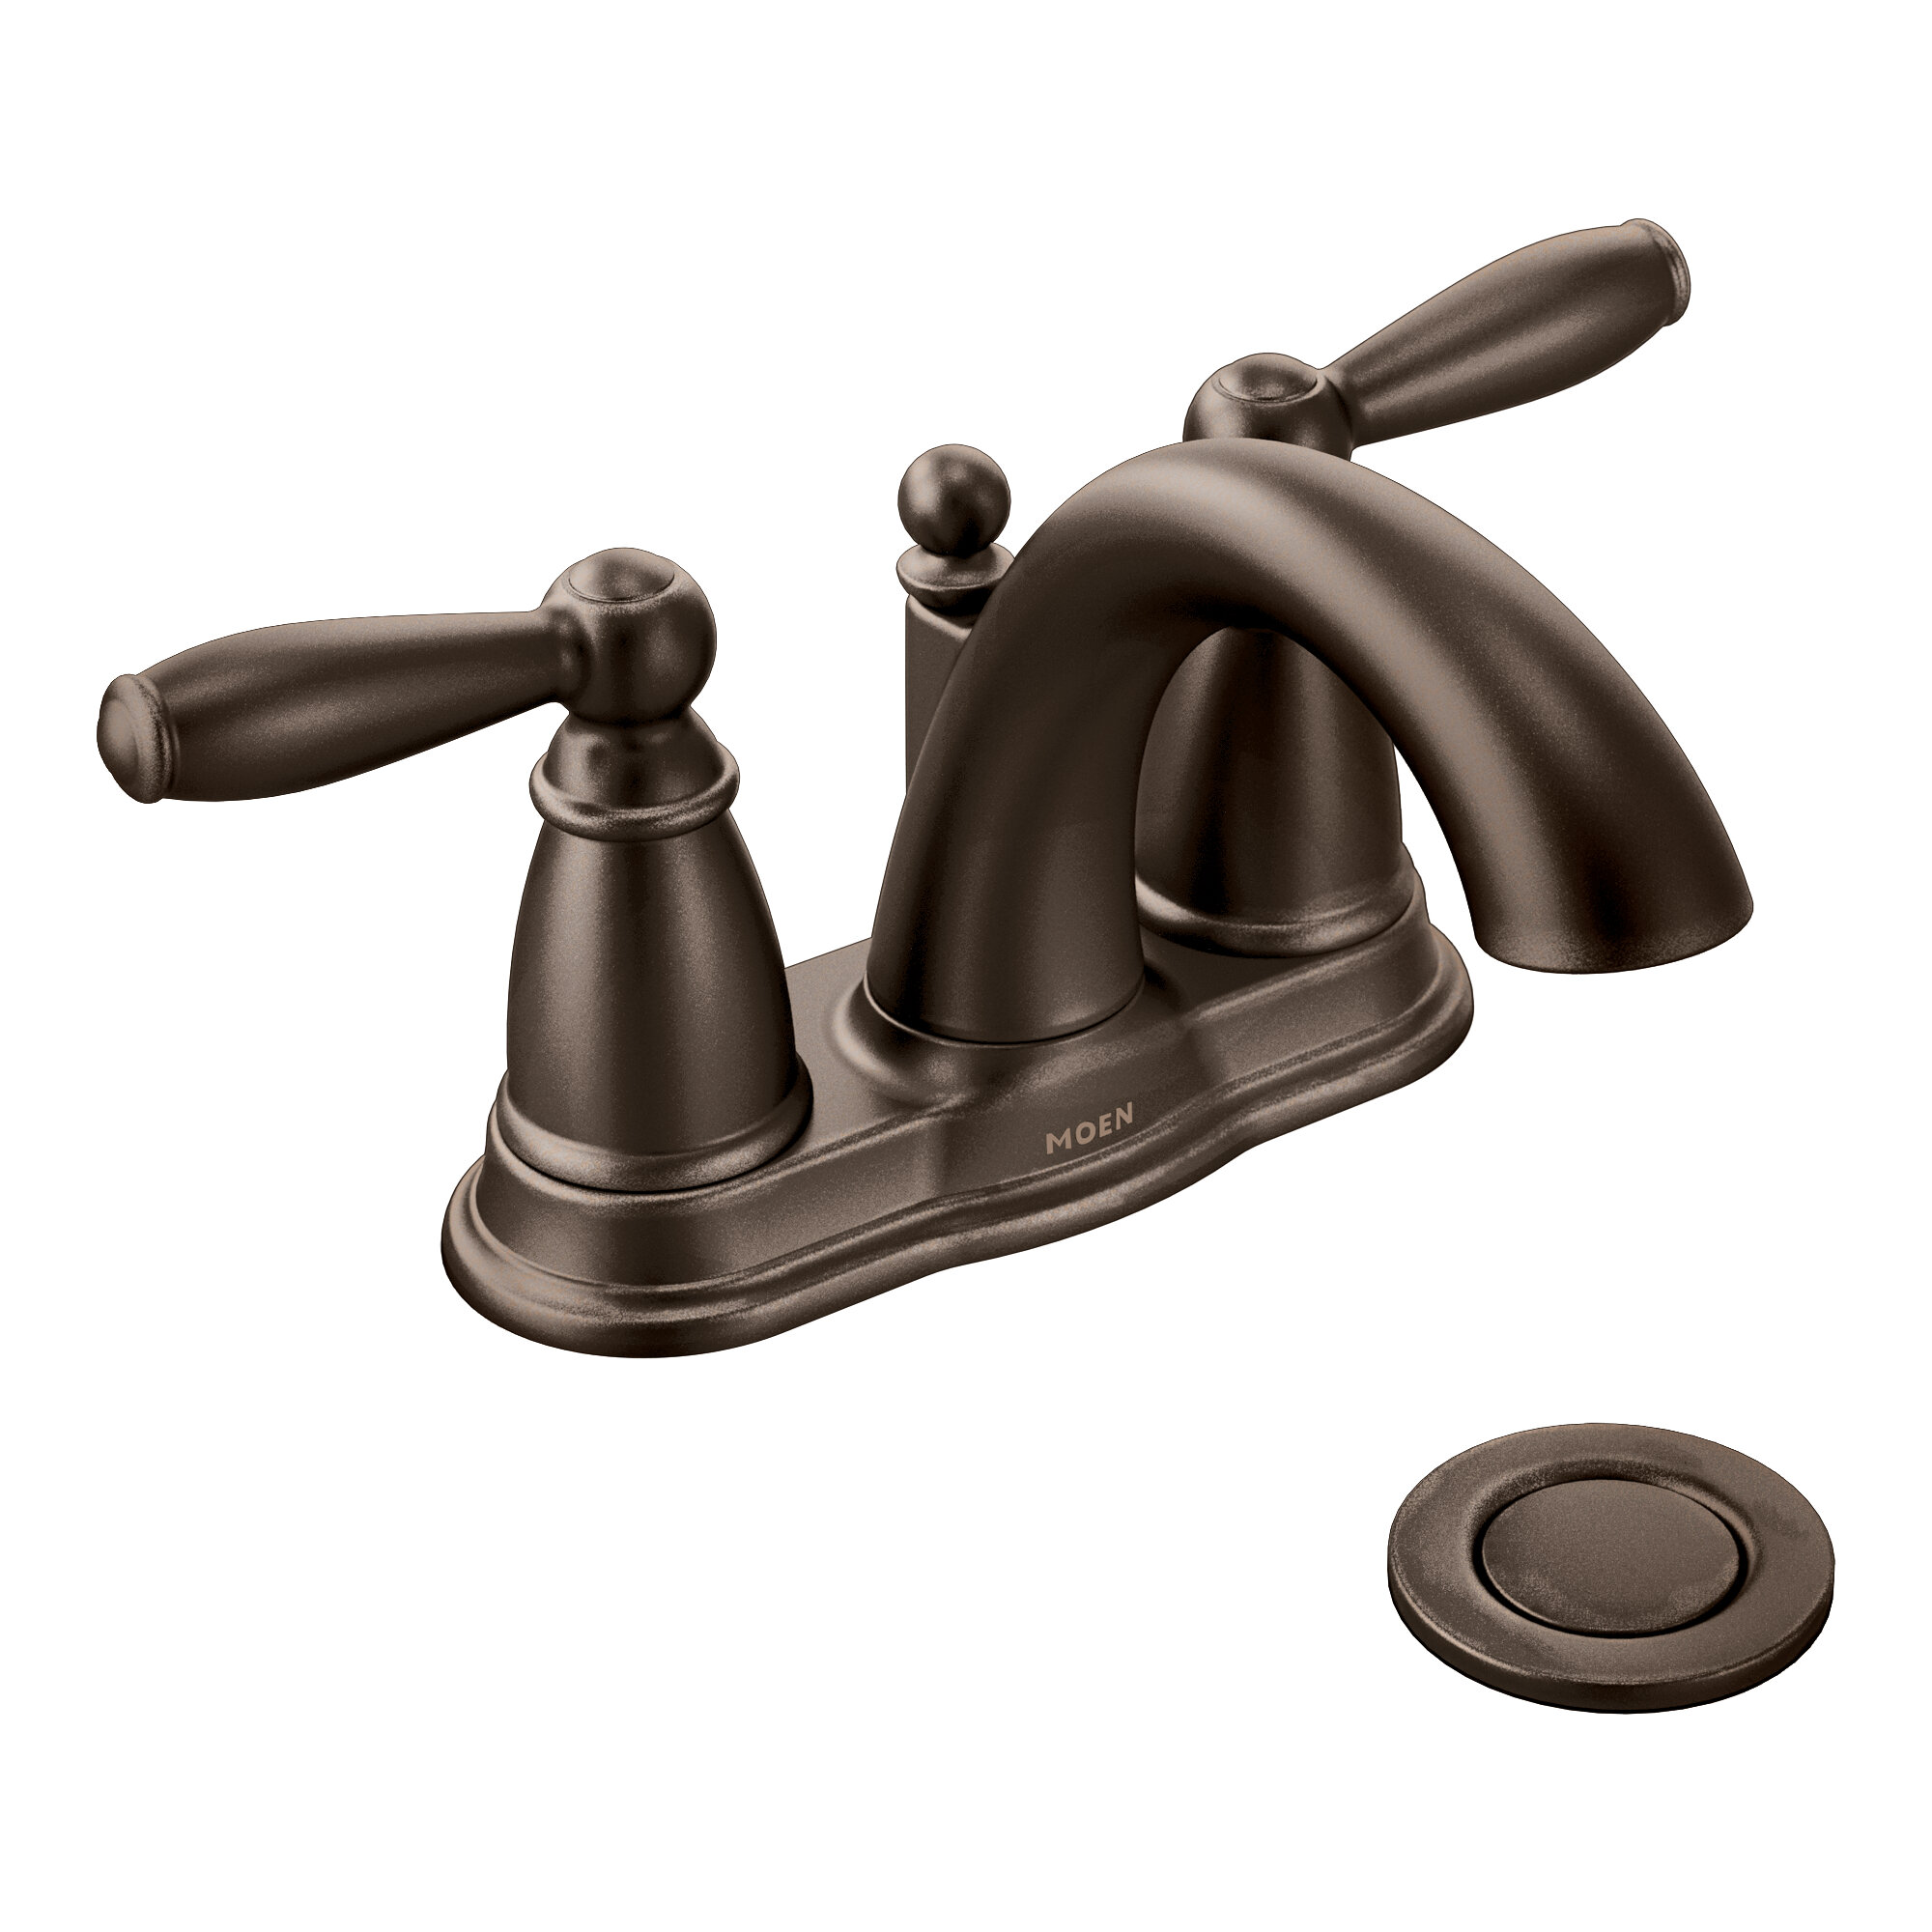 Brantford Centerset Bathroom Faucet with Drain Assembly